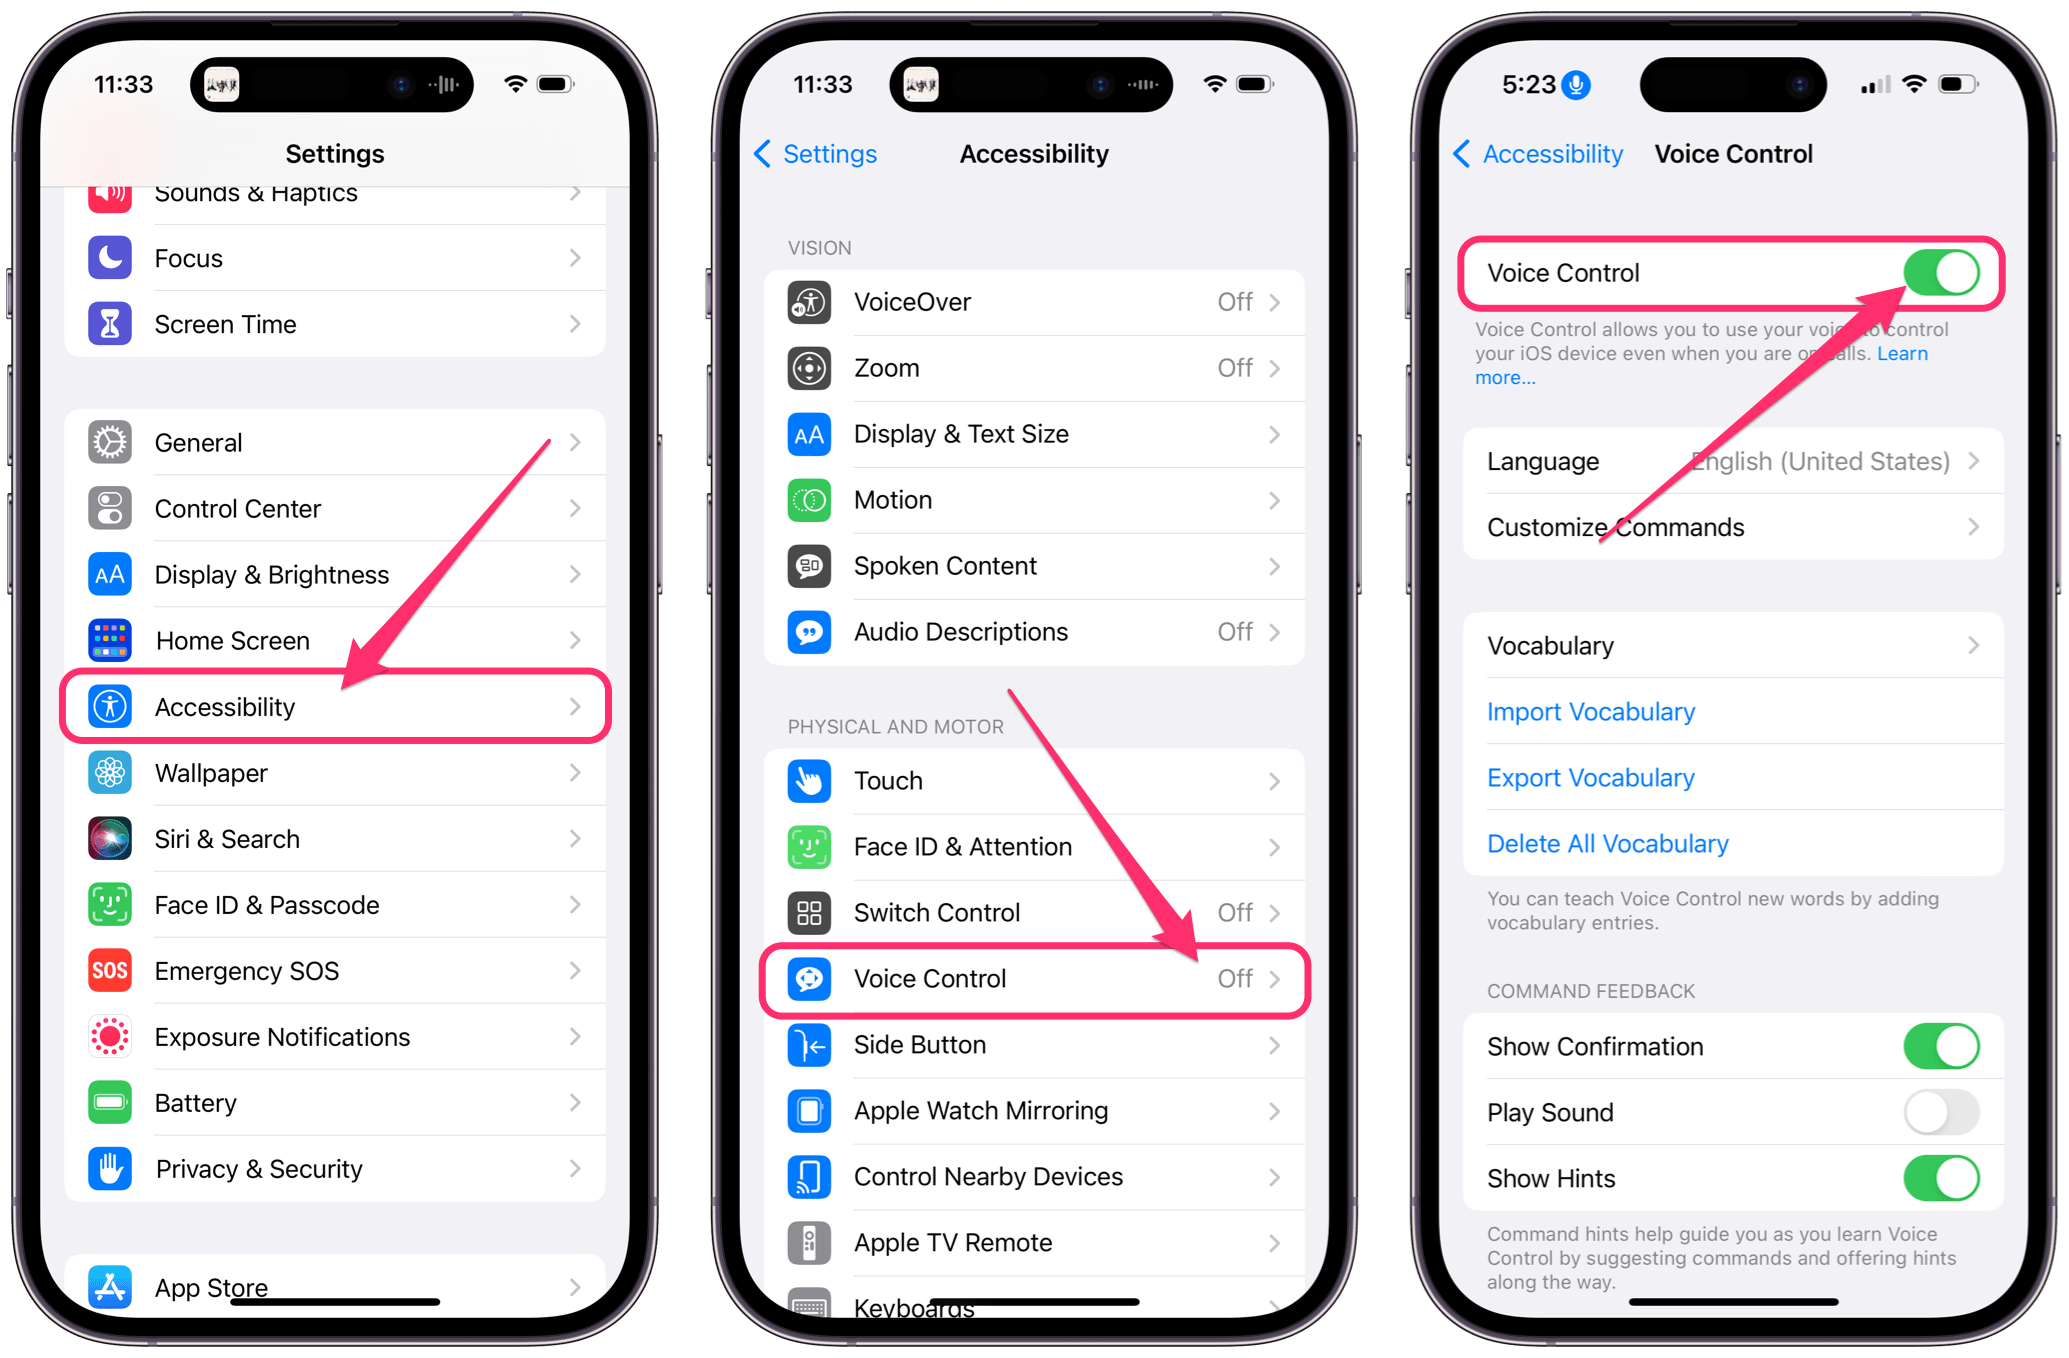 turn off voice control in iPhone settings to remove blue microphone